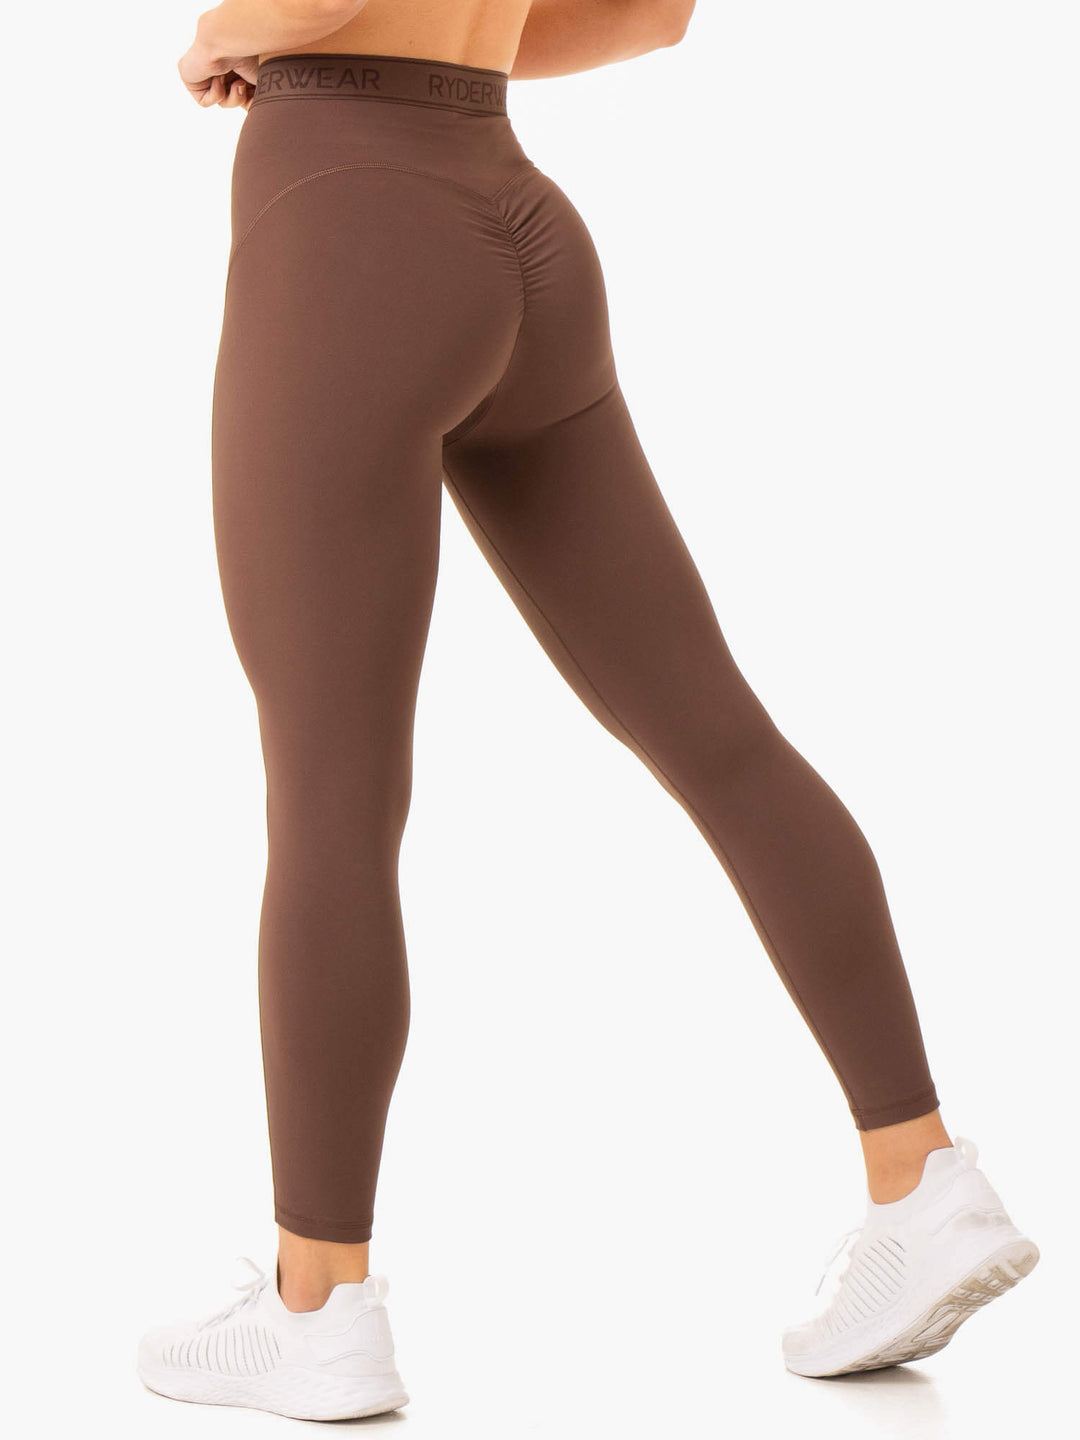 Up To 71% Off on Women's Yoga Shorts High Wais